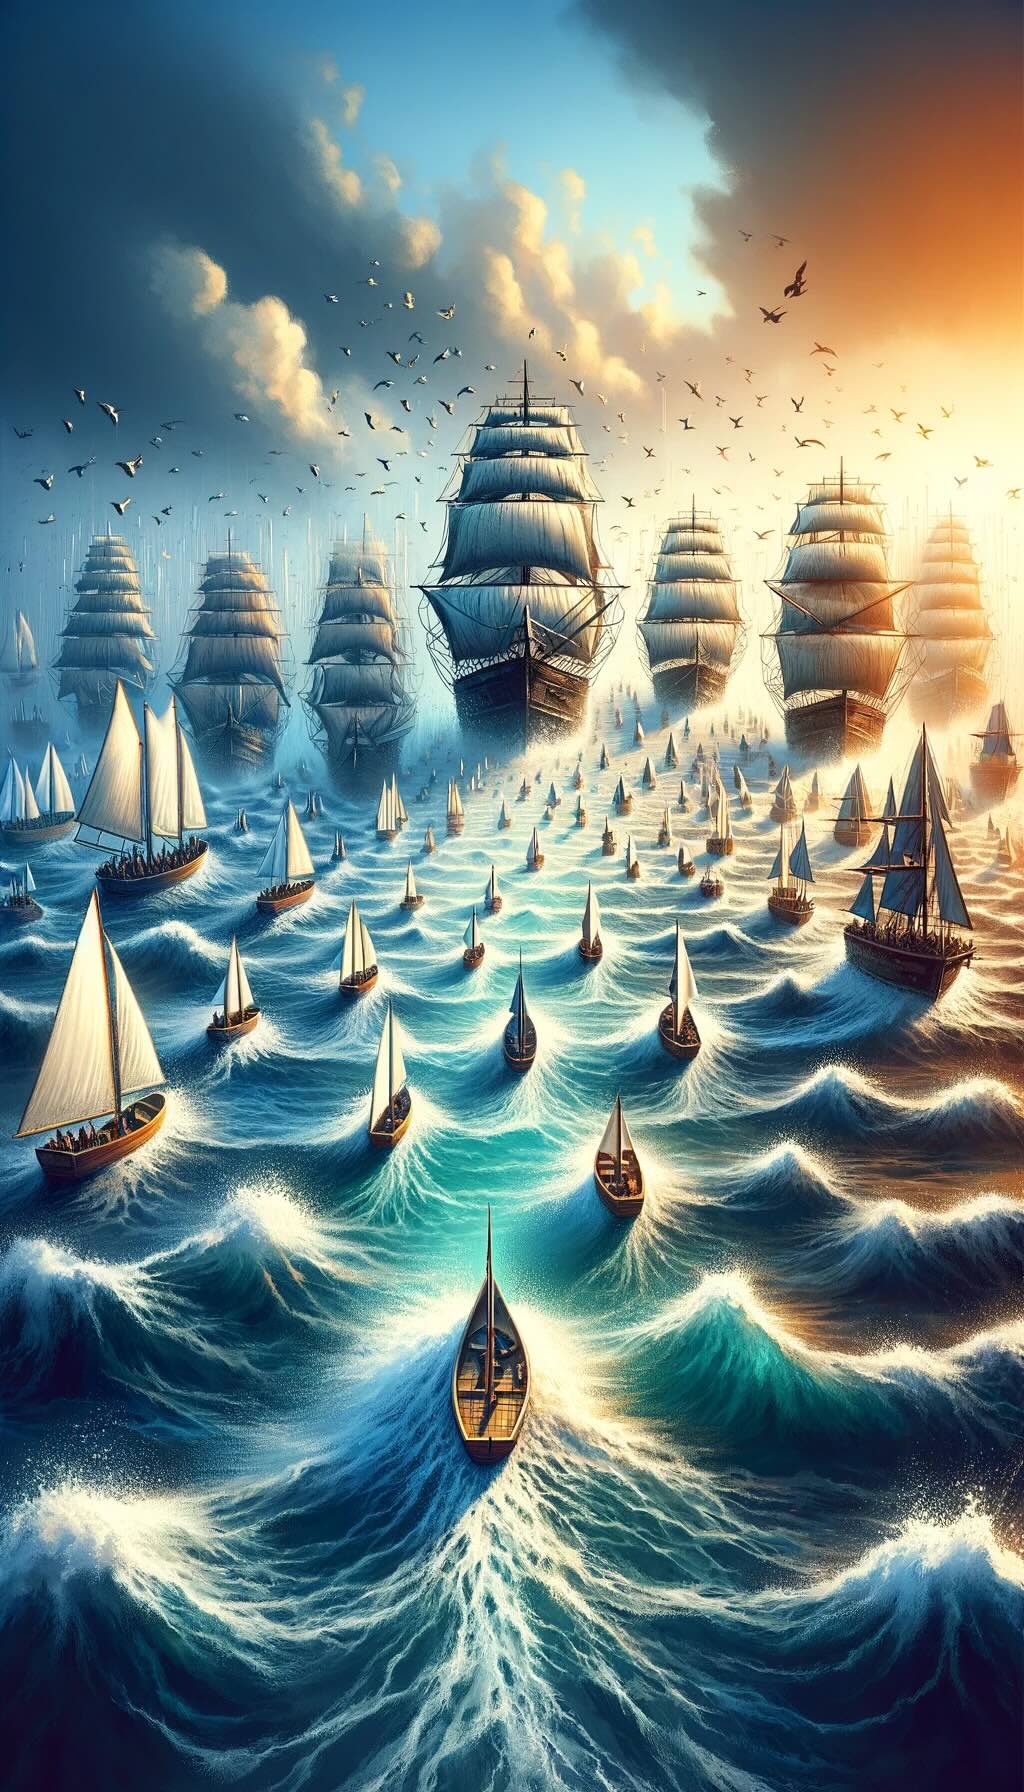 Beautifully symbolizes the investment journey through the metaphor of an ocean voyage, contrasting the varying financial requisites of ETFs and Mutual Funds. It captures the essence of financial accessibility, from the grand vessels representing Mutual Funds with varying minimum investments to the accessible, nimble sailboats of ETFs, illustrating a world of investment opportunities that cater to both large and small investors alike. 